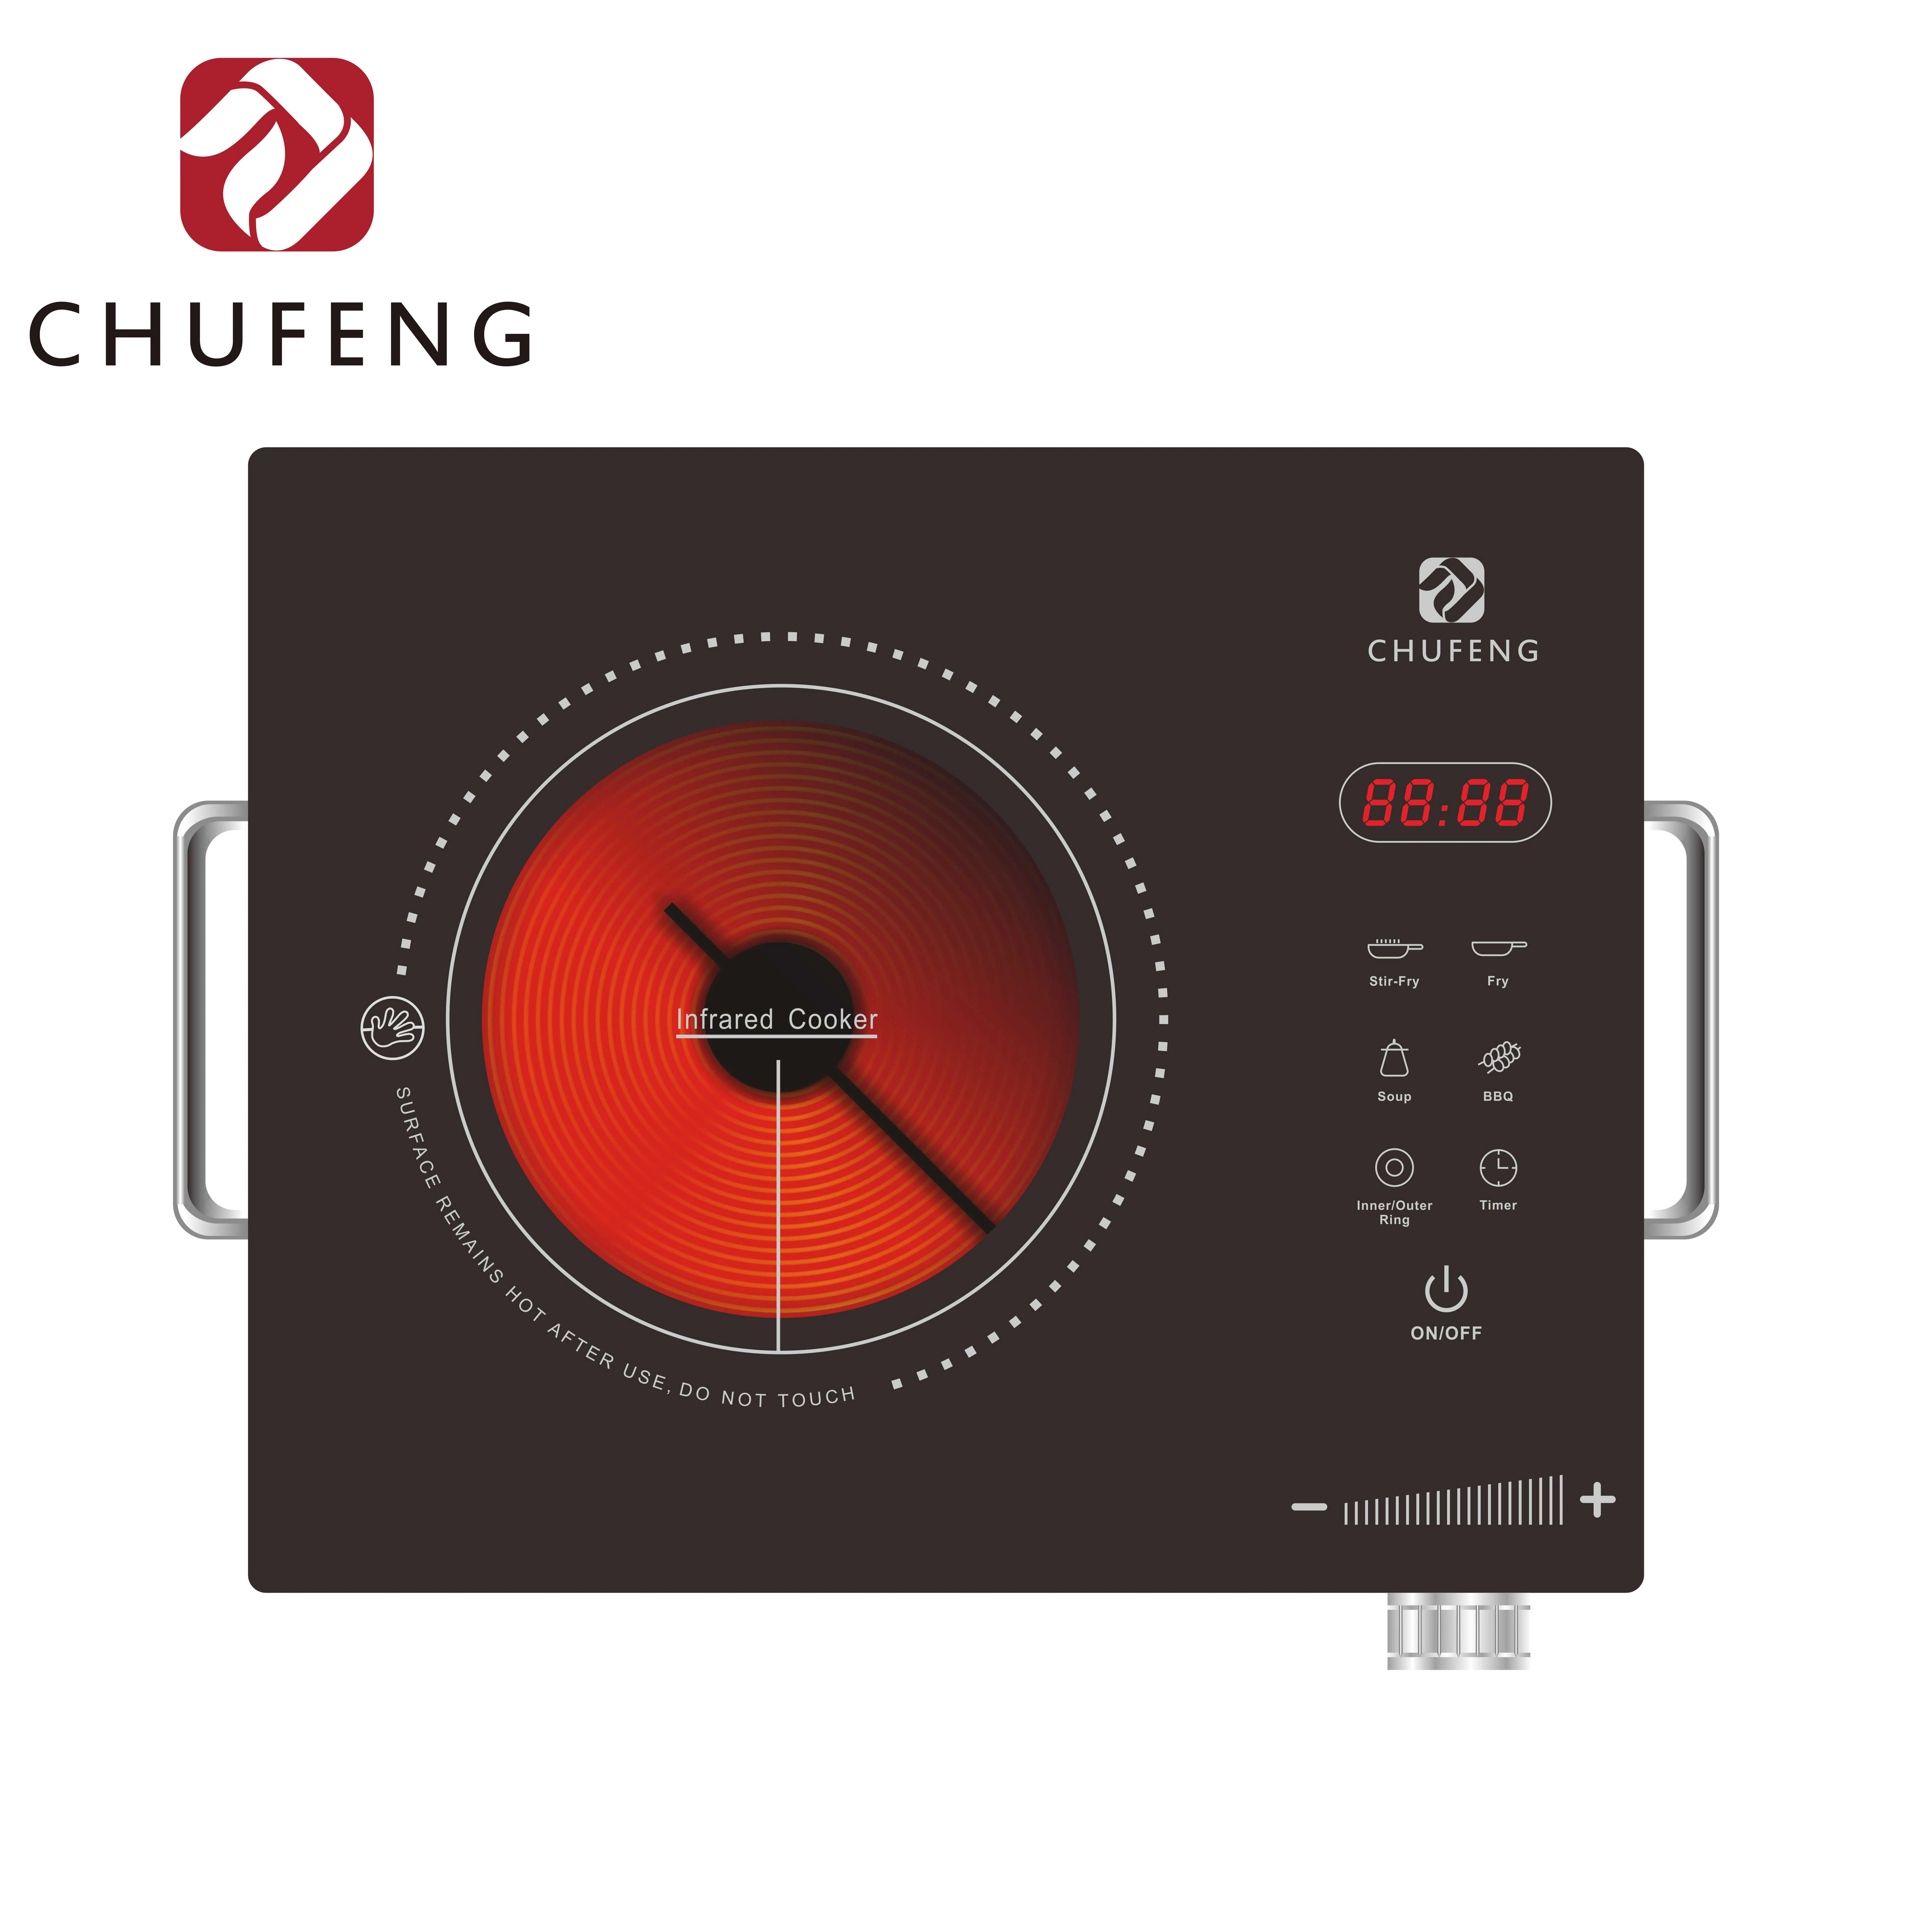 Microwave ceramic infrared cooker